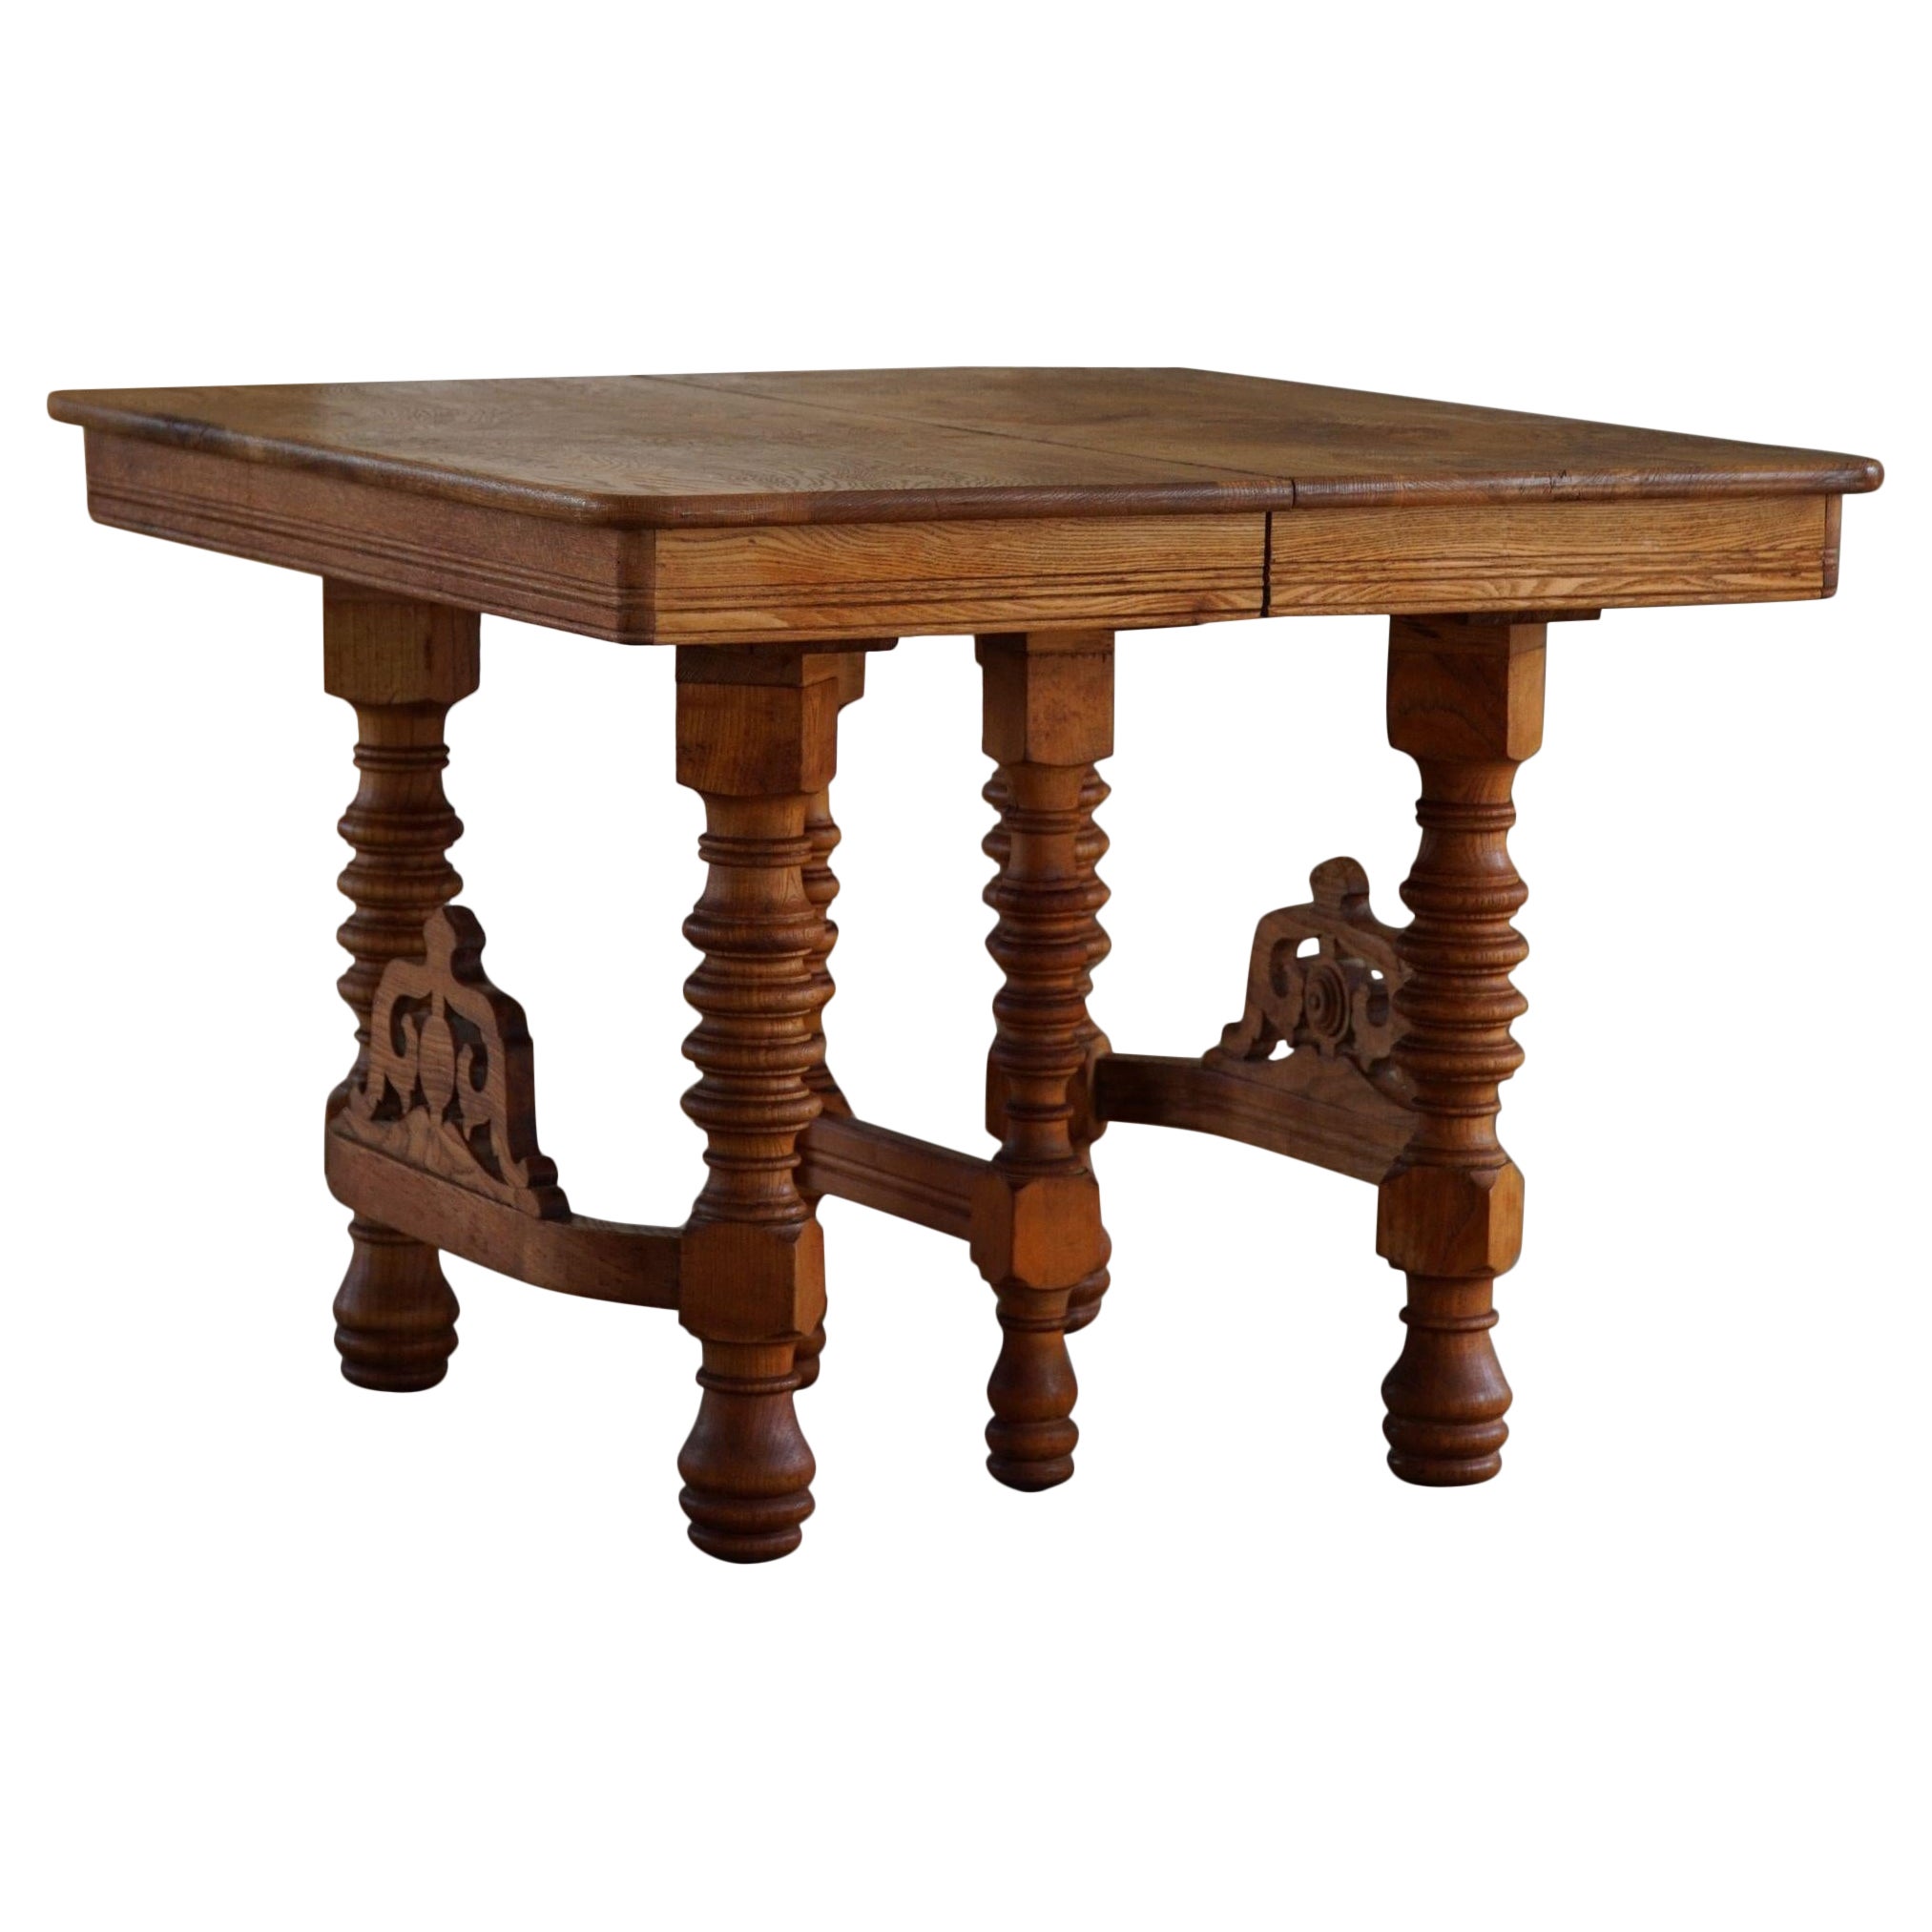 Late 19th Century Square Dining / Desk Table, Baroque, Danish Cabinetmaker For Sale